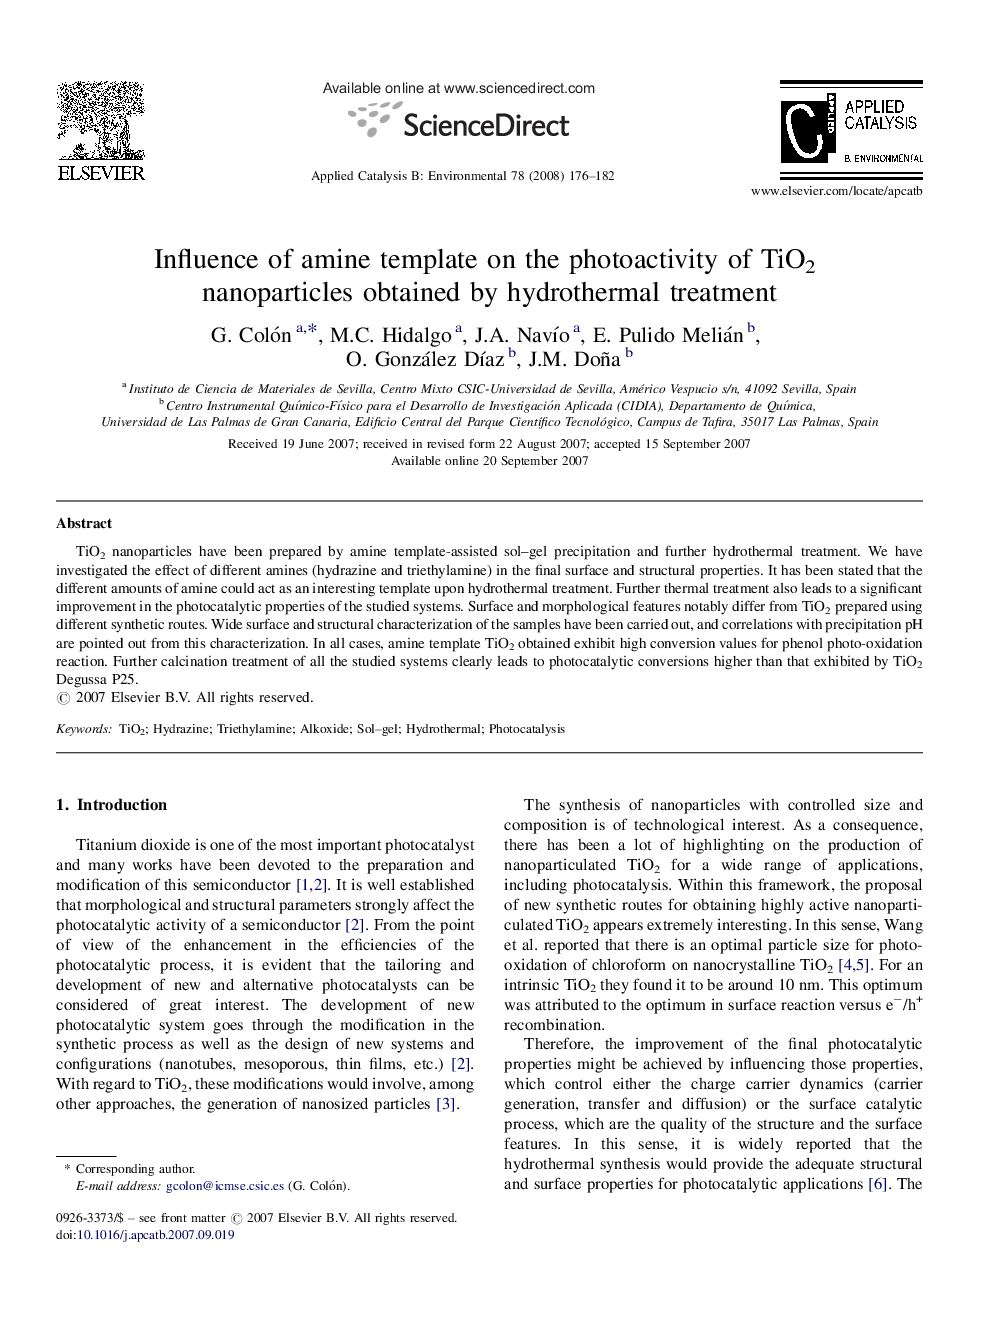 Influence of amine template on the photoactivity of TiO2 nanoparticles obtained by hydrothermal treatment